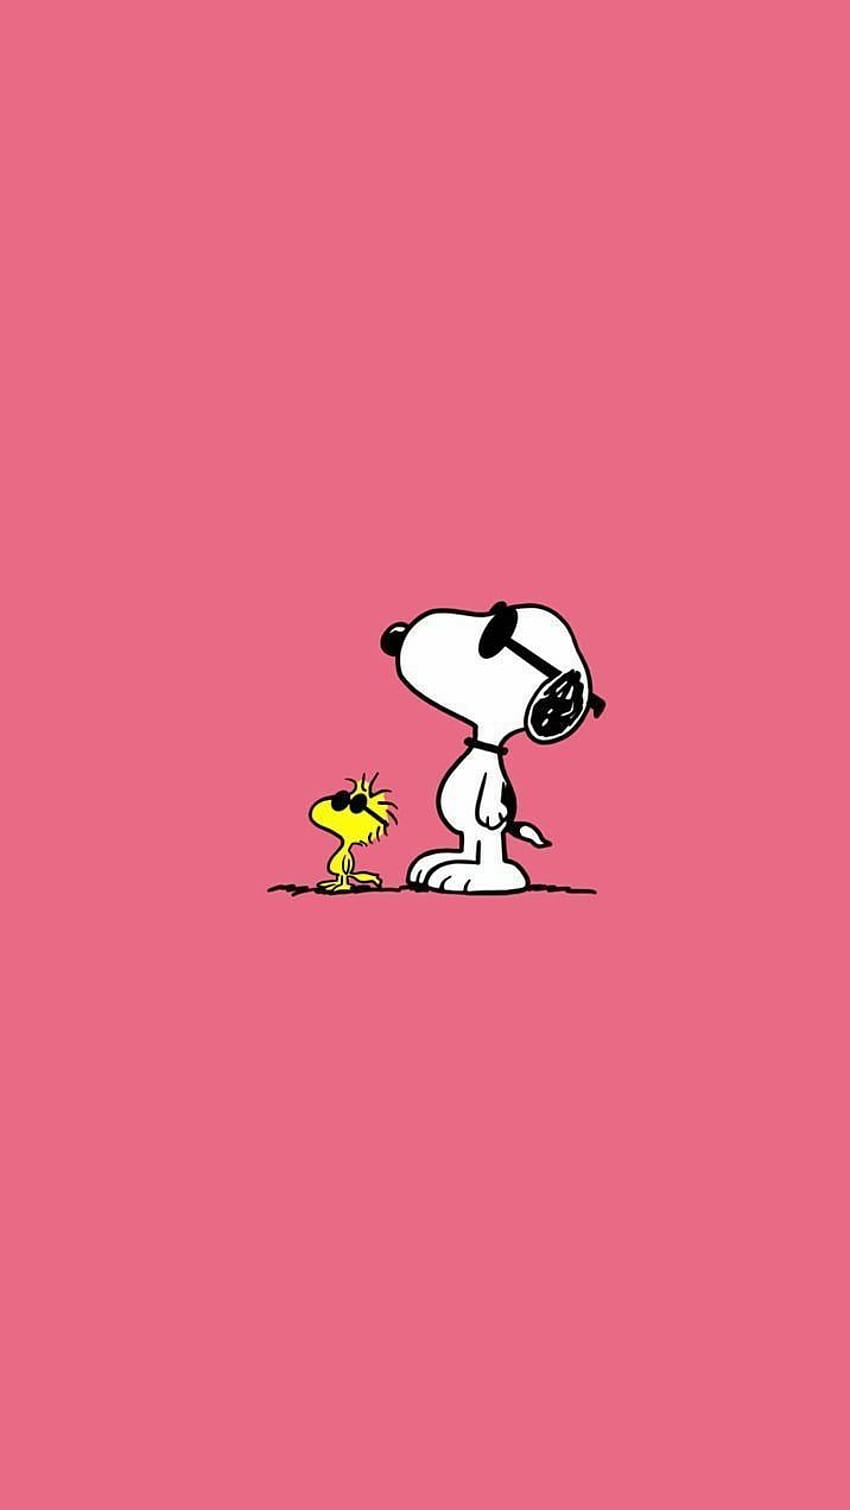 Aesthetic, cool joe and snoopy, cool aesthetic HD phone wallpaper